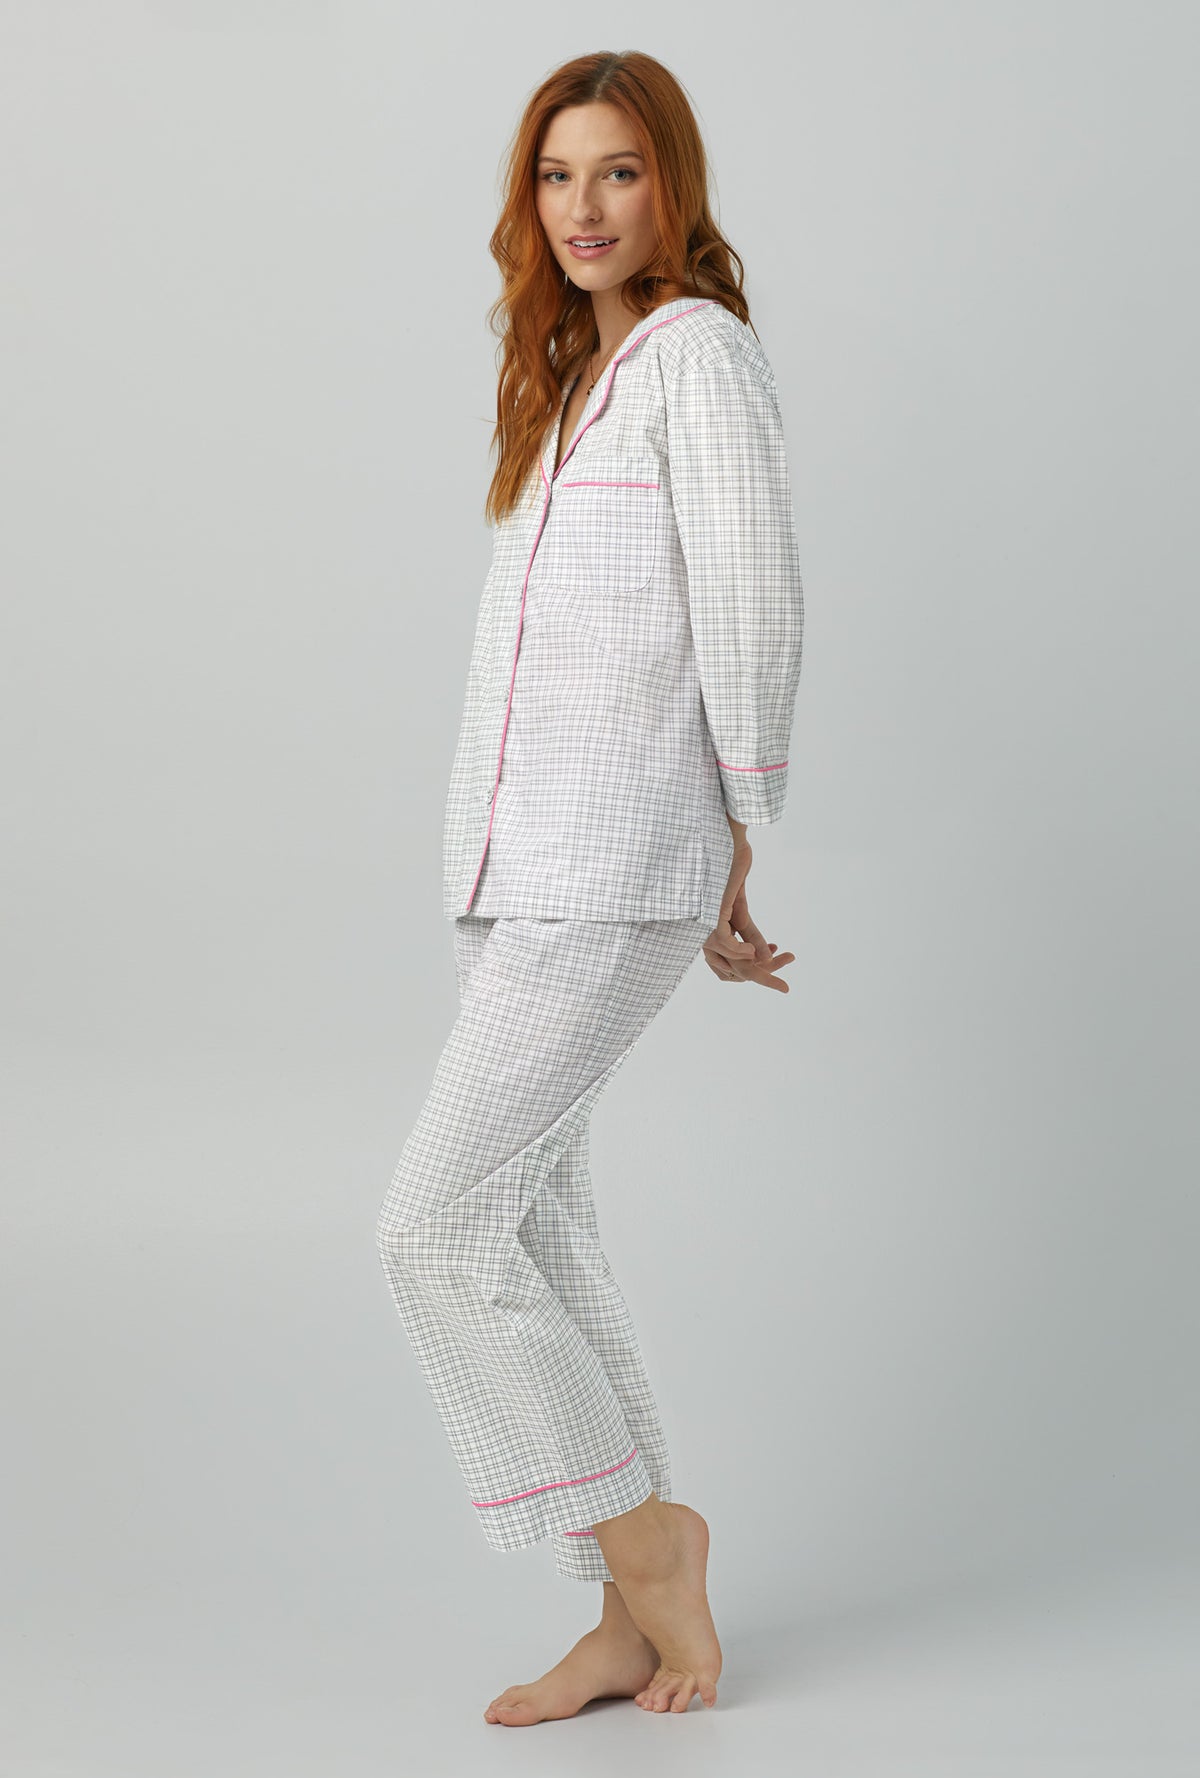 A lady wearing 3/4 Sleeve Classic Woven Cotton Poplin Cropped PJ Set with cottage plaid prints